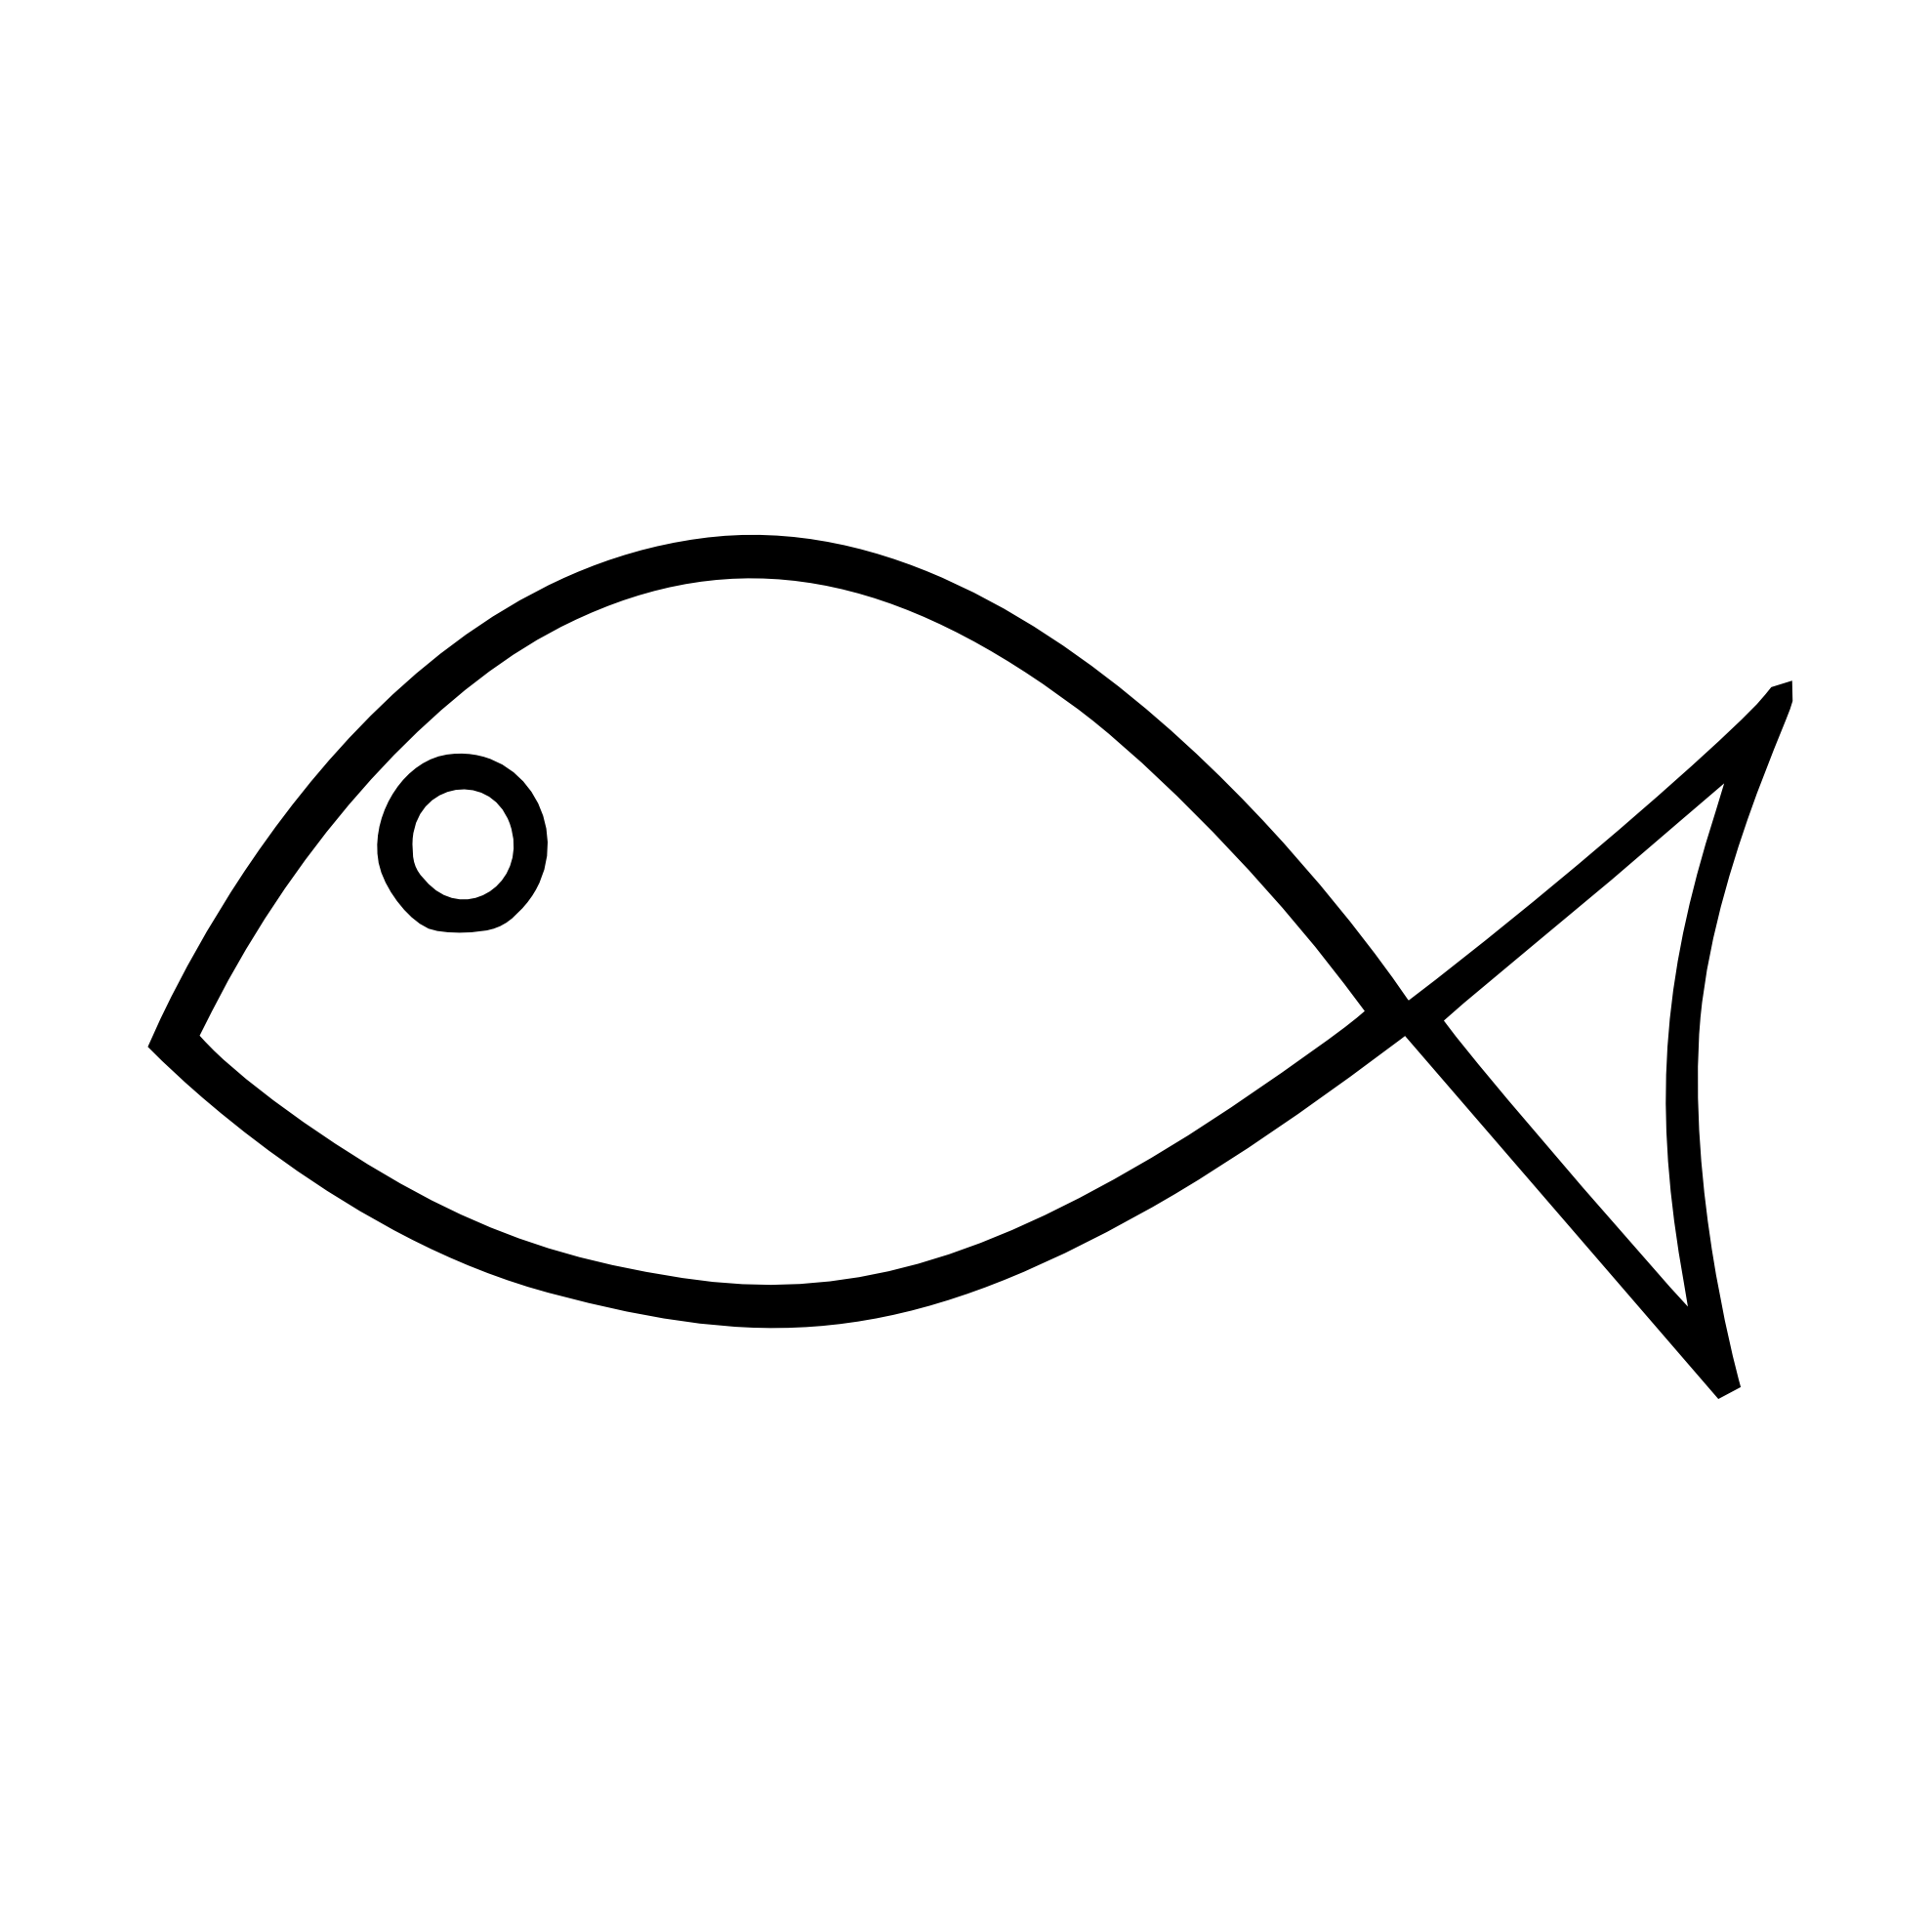 Fish Outline Clipart Black And White | Clipart library - Free 